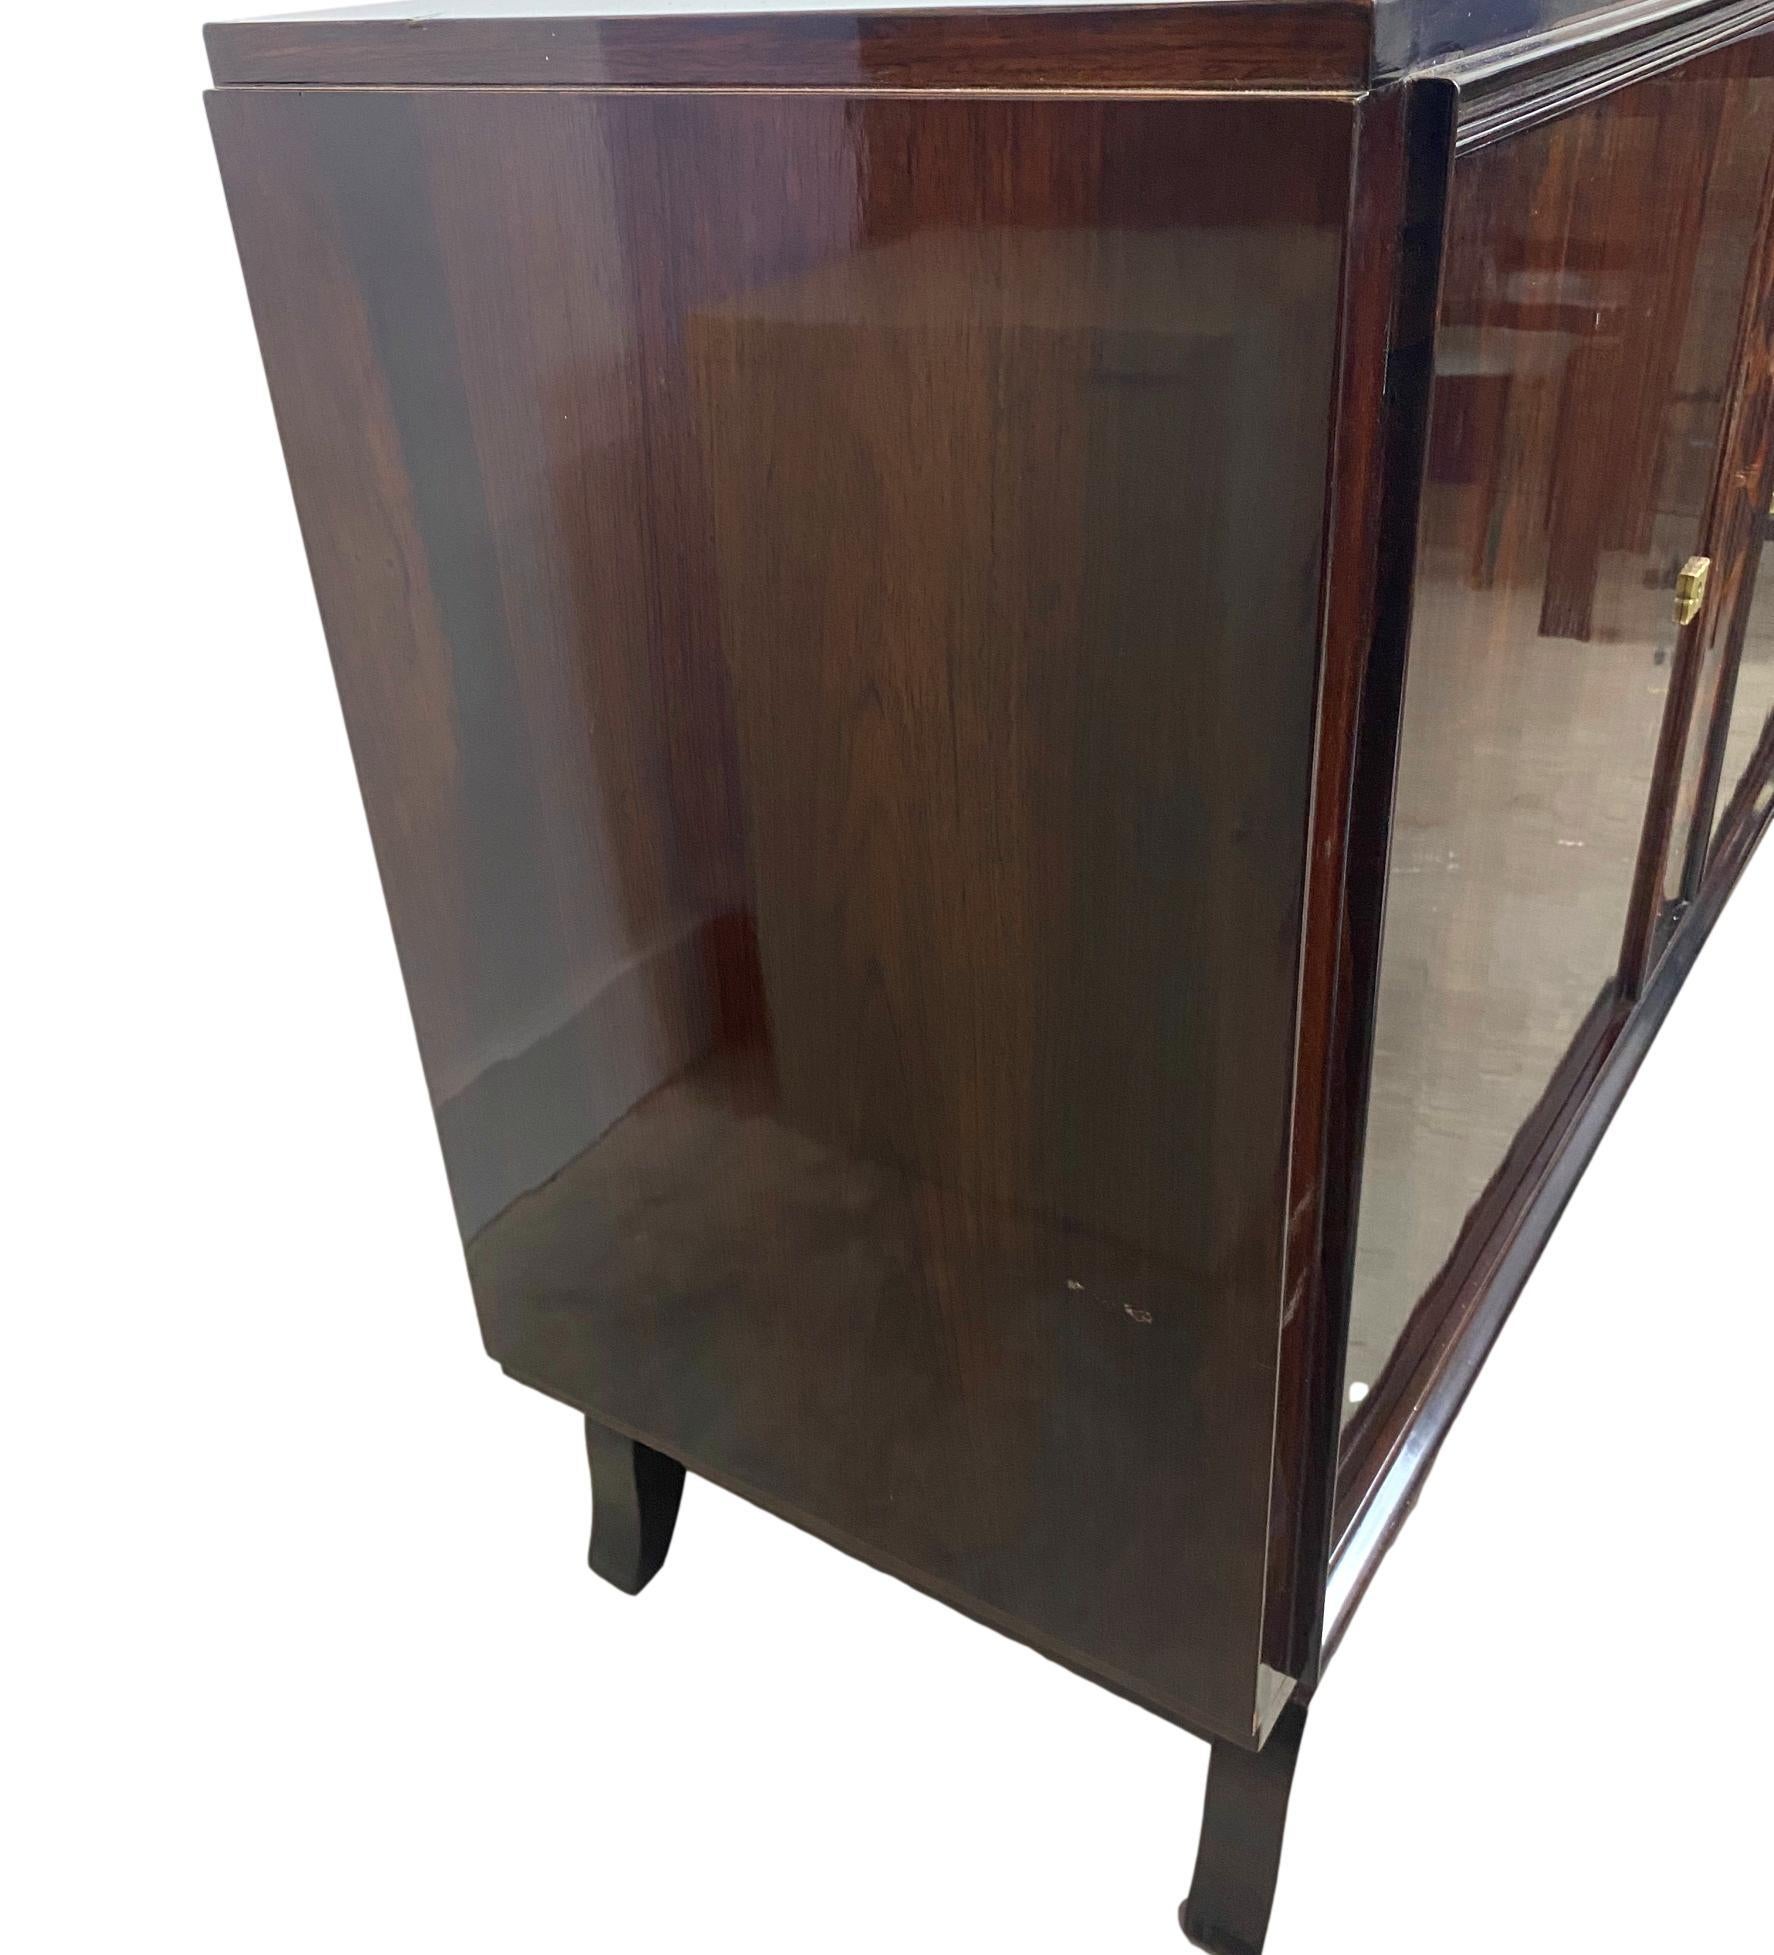 Hand-Crafted Mid-Century Modern Hollywood Regency Inlaid Rosewood Credenza, French, c. 1930 For Sale